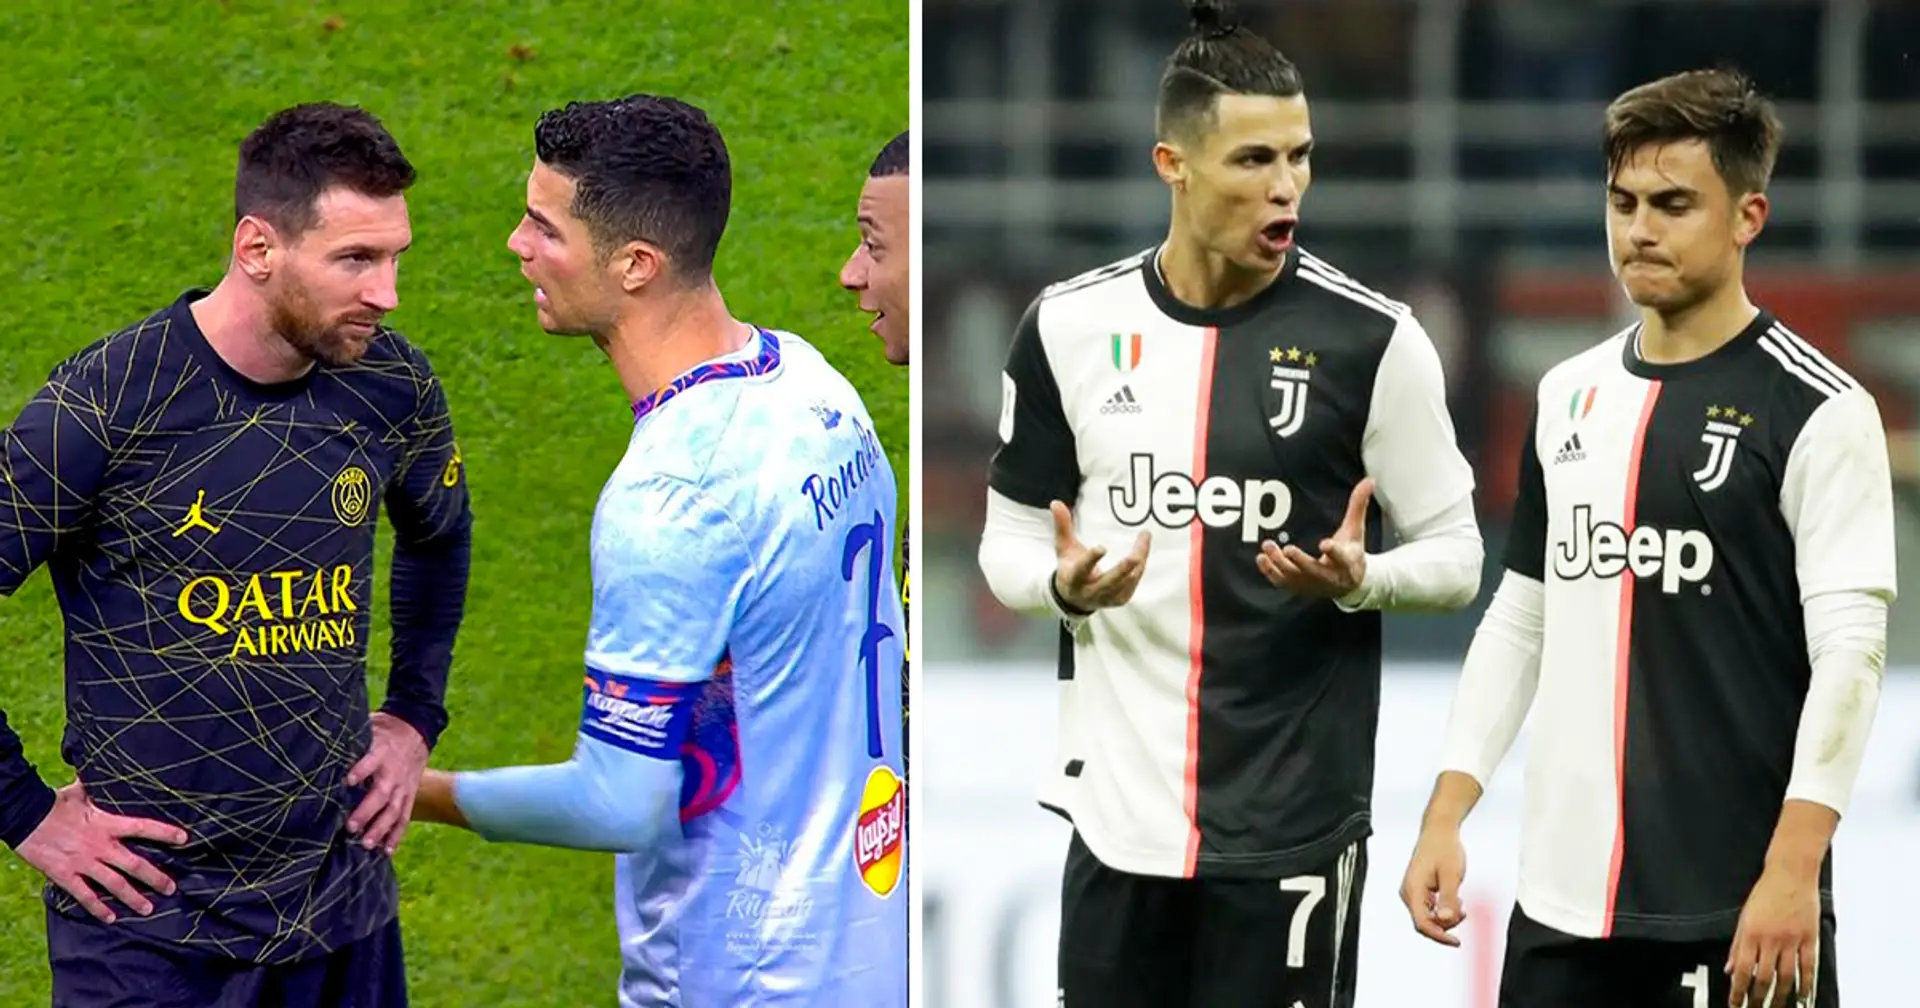 'I was always on Messi's side': Paulo Dybala reveals he once told Cristiano Ronaldo he hated him